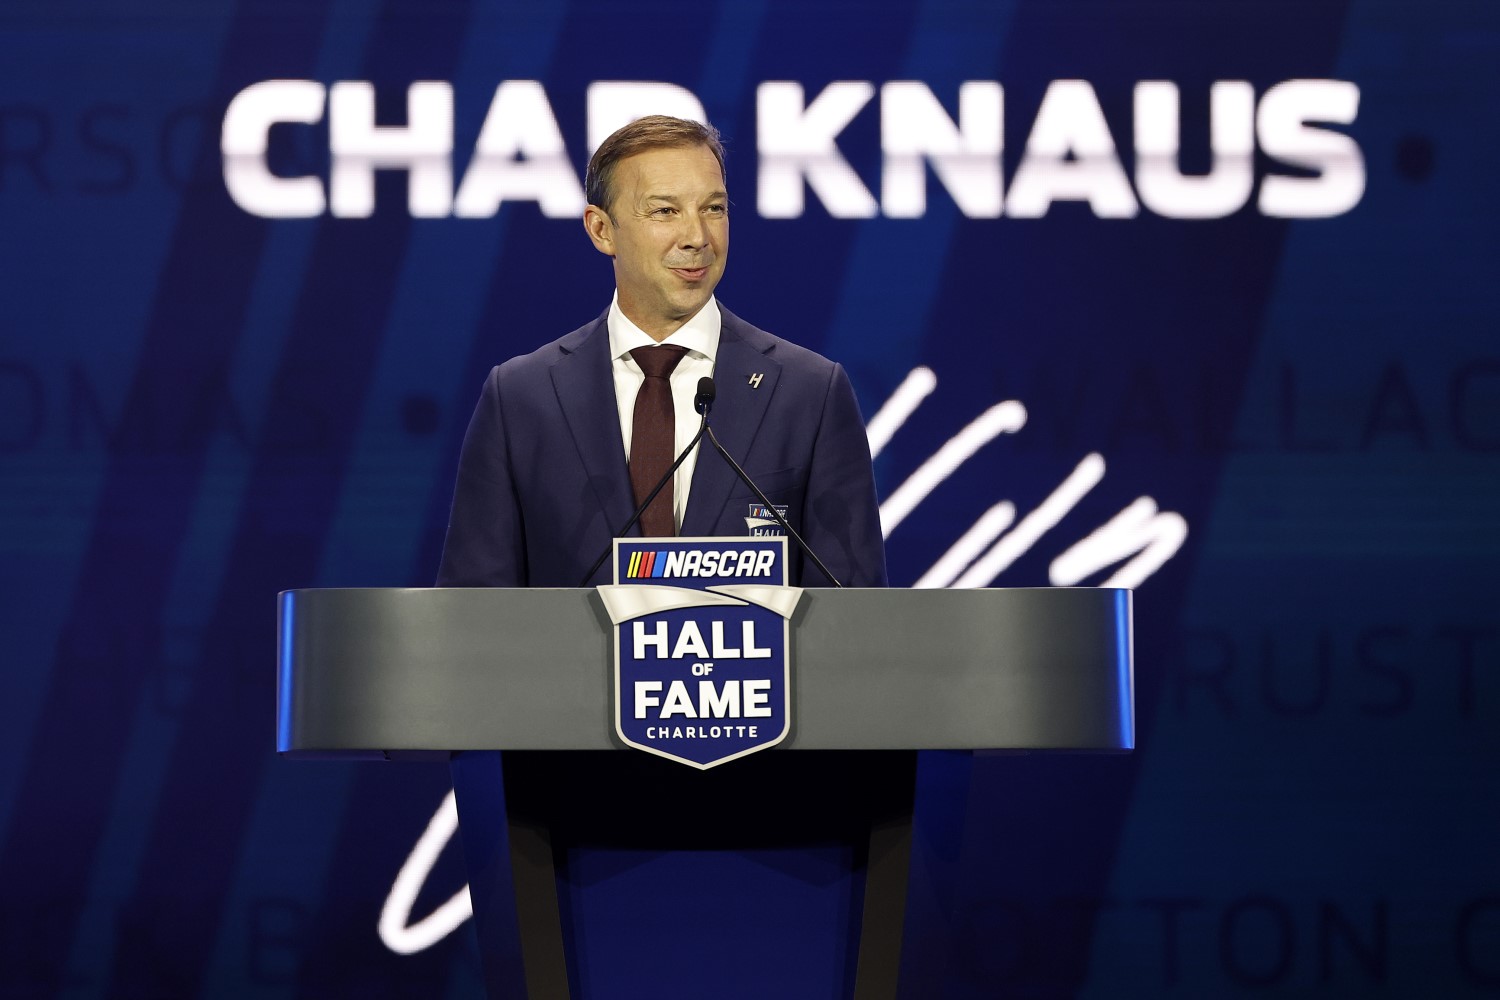 NASCAR Hall of Fame inductee Chad Knaus speaks during the 2024 NASCAR Hall of Fame Induction Ceremony at Charlotte Convention Center on January 19, 2024 in Charlotte, North Carolina. (Photo by Chris Graythen/Getty Images)